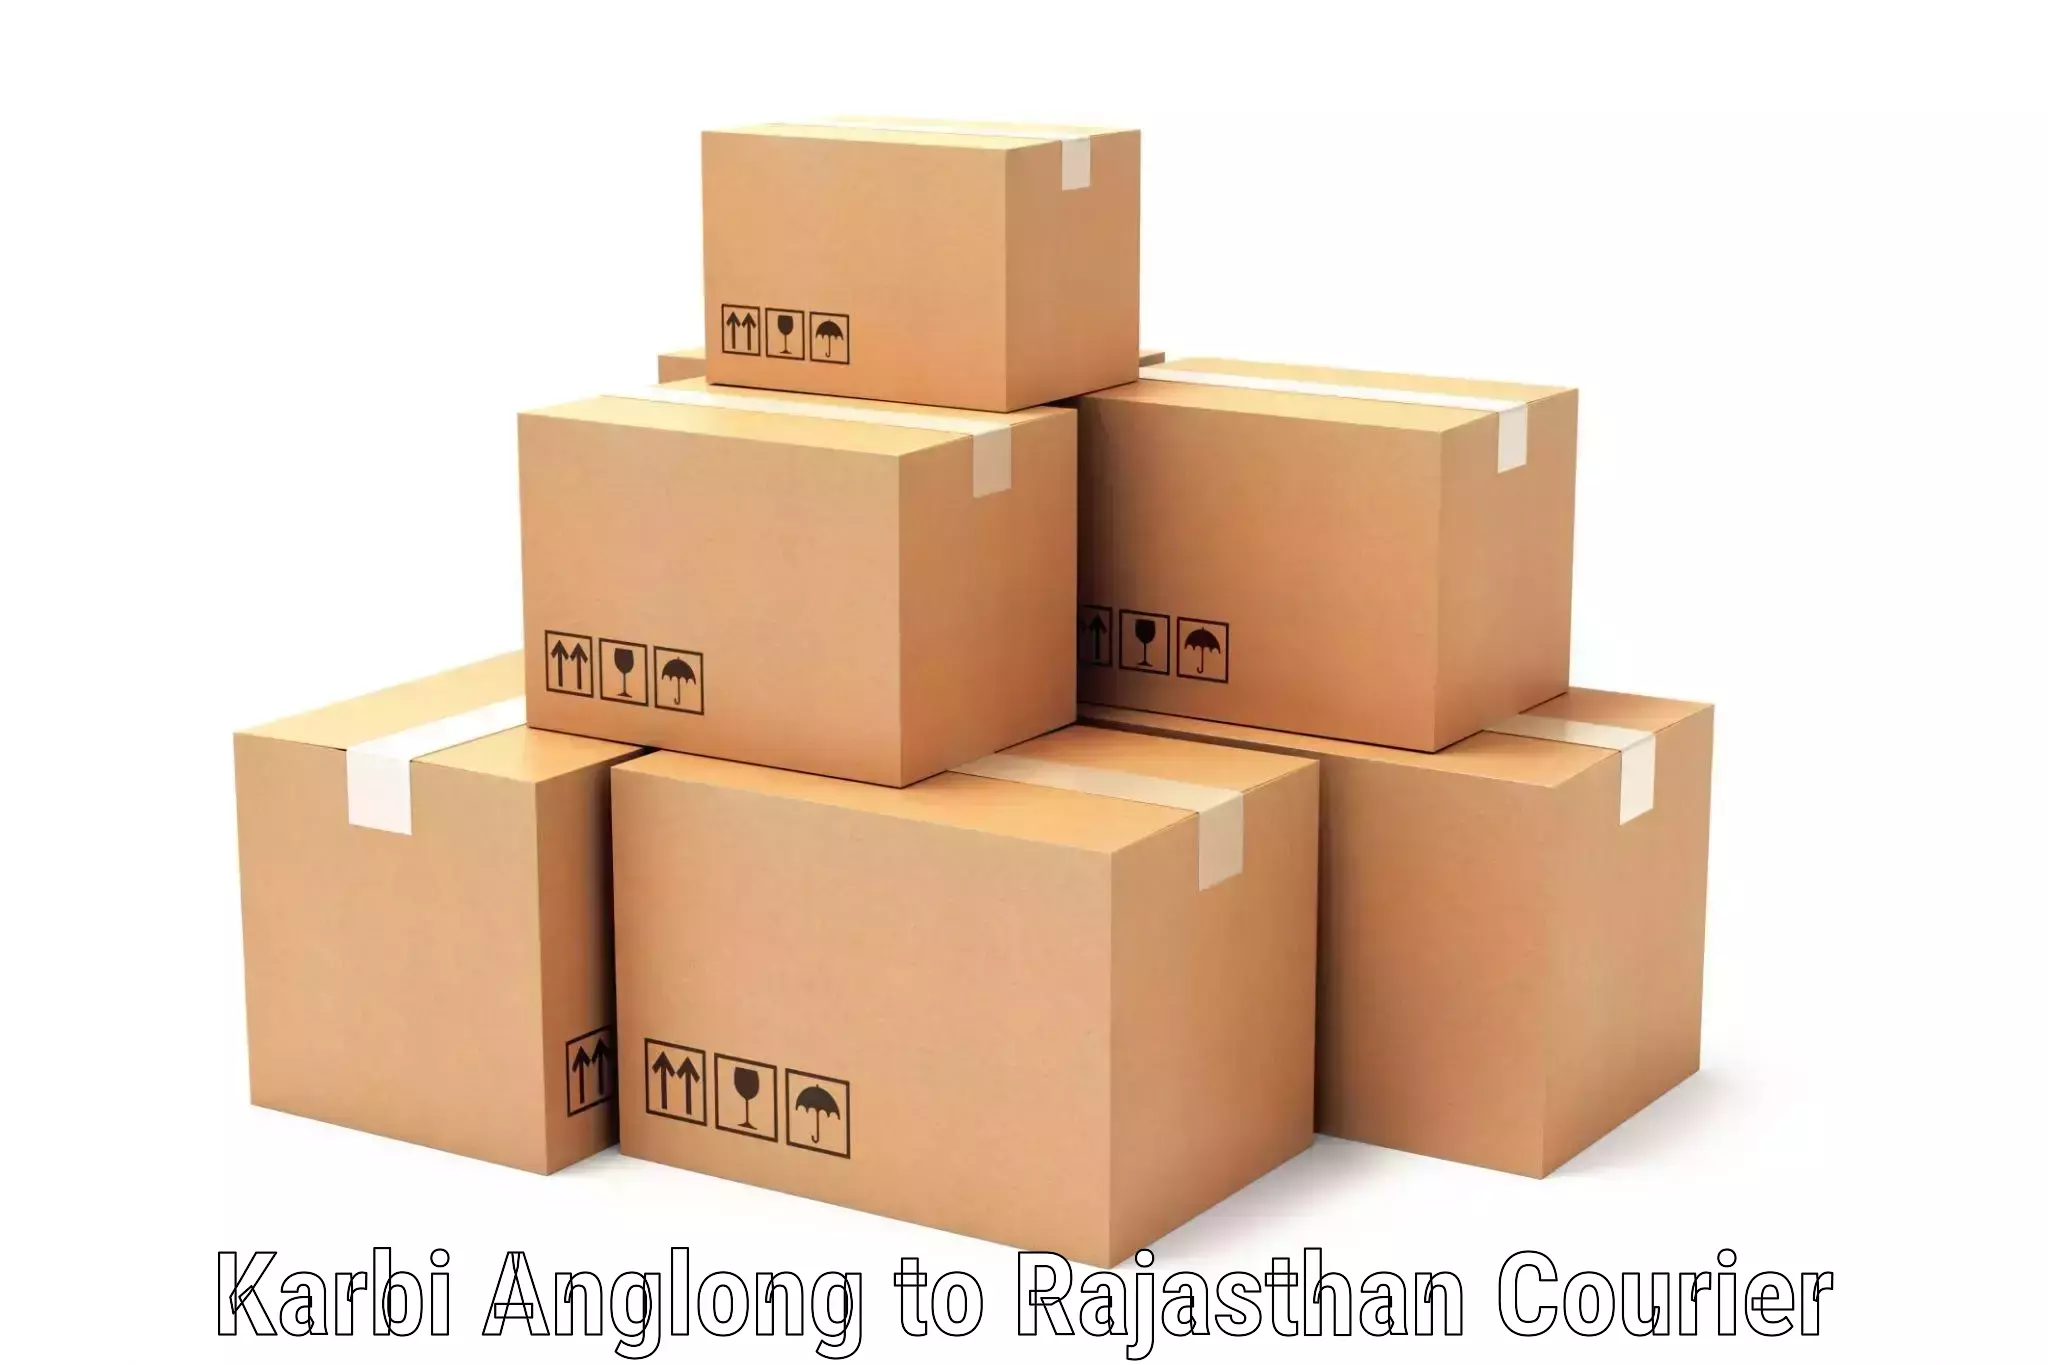 High-performance logistics in Karbi Anglong to Piparcity